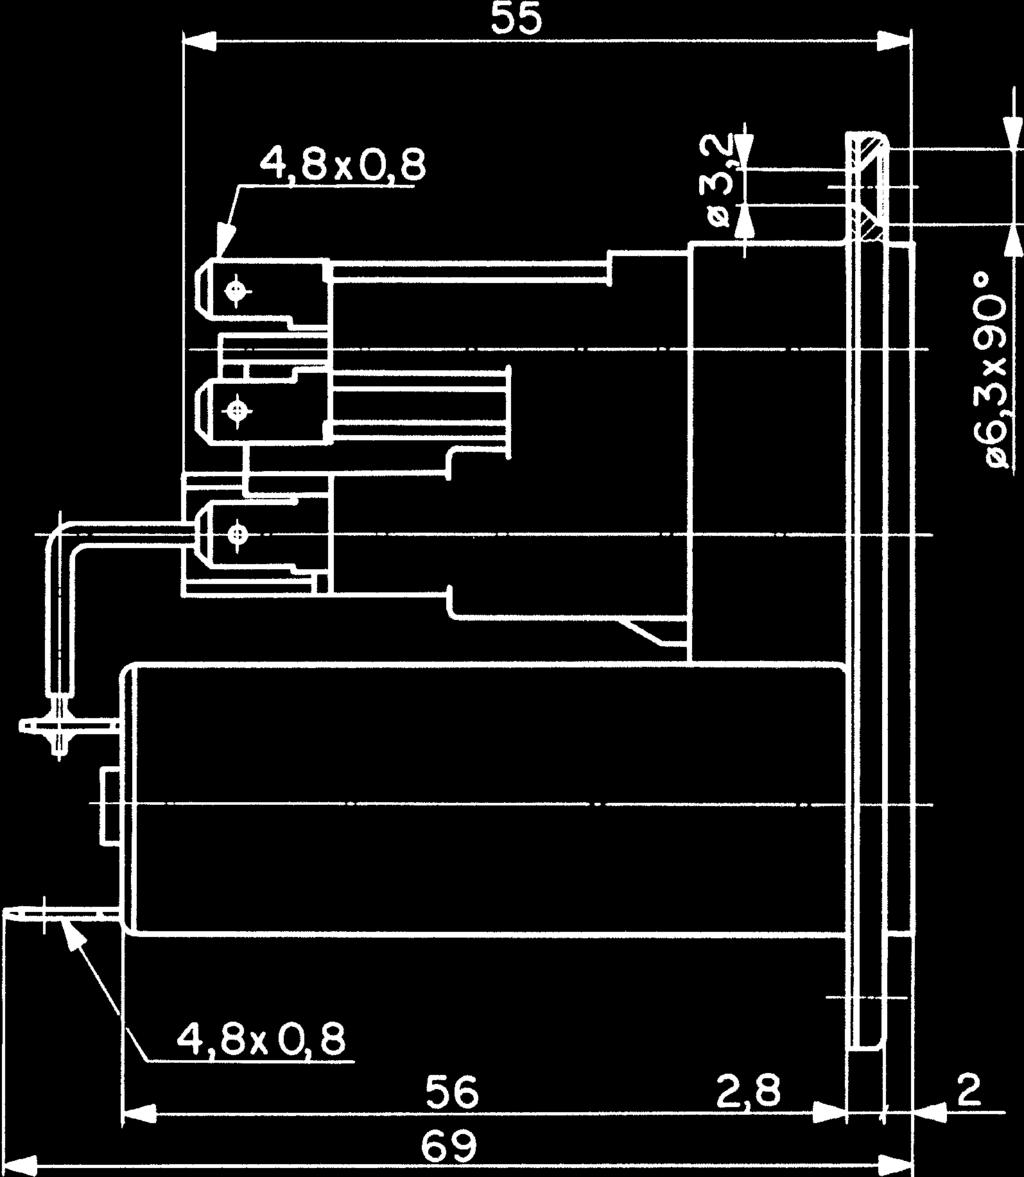 Voltage Selector 5 6 7 E Cx 8 N Cy F2 4 x) 9 10 x) Connections to be made by customer Optional accessory cable for voltage selector wiring shown on page 43 Standards: UL 1283; CSA C22.